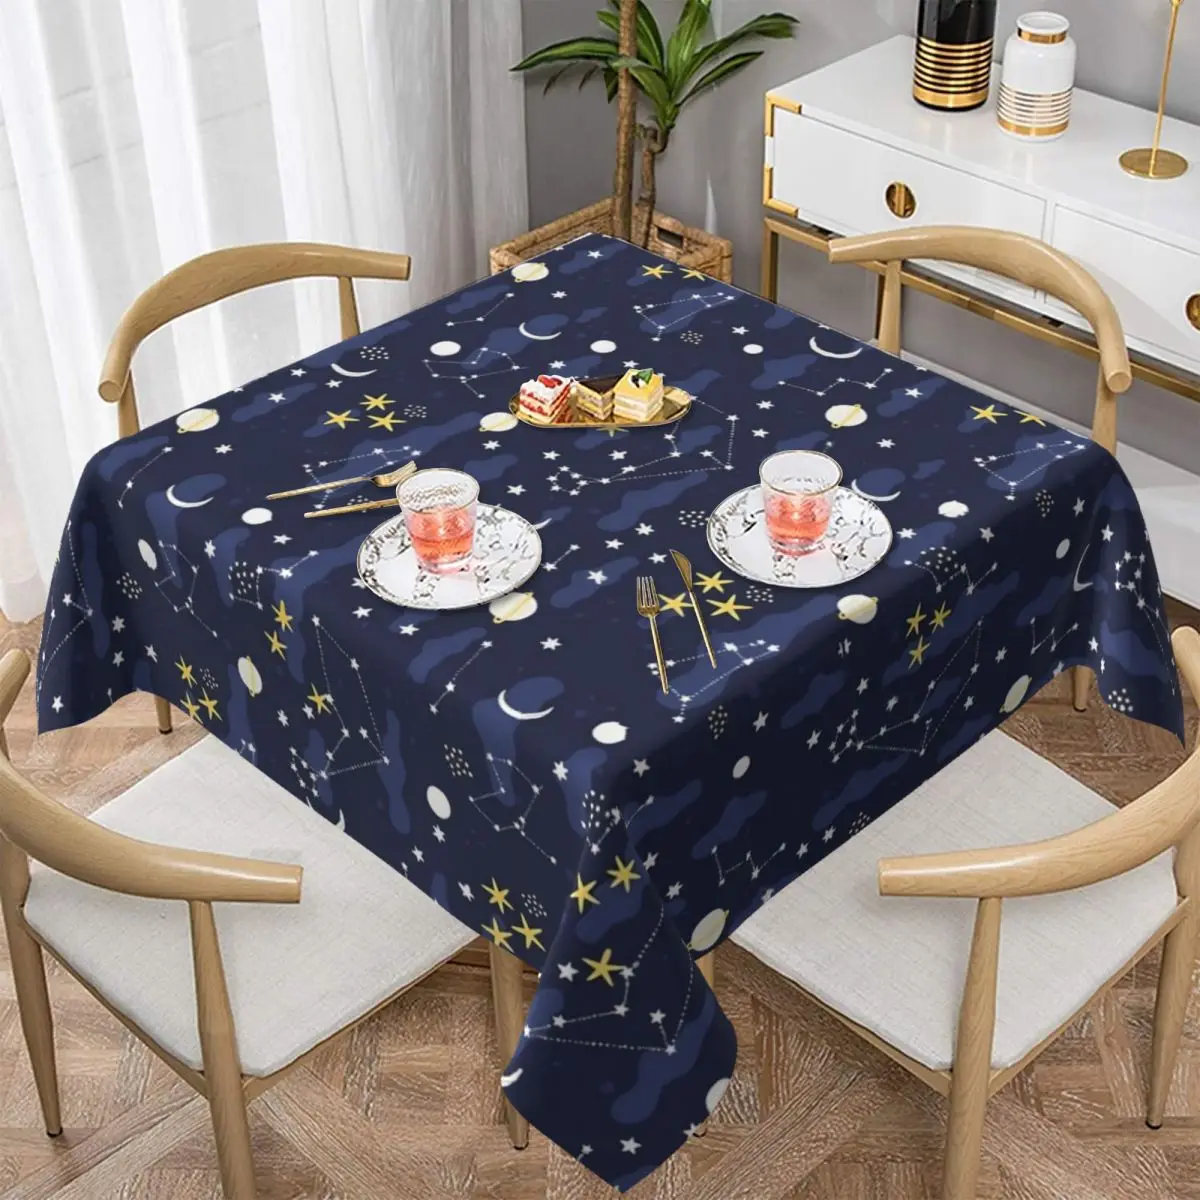 

Galaxy Astrology Tablecloth Moon and Stars Cheap Kawaii Table Cover Outside Printed Decoration Polyester Table Cloth